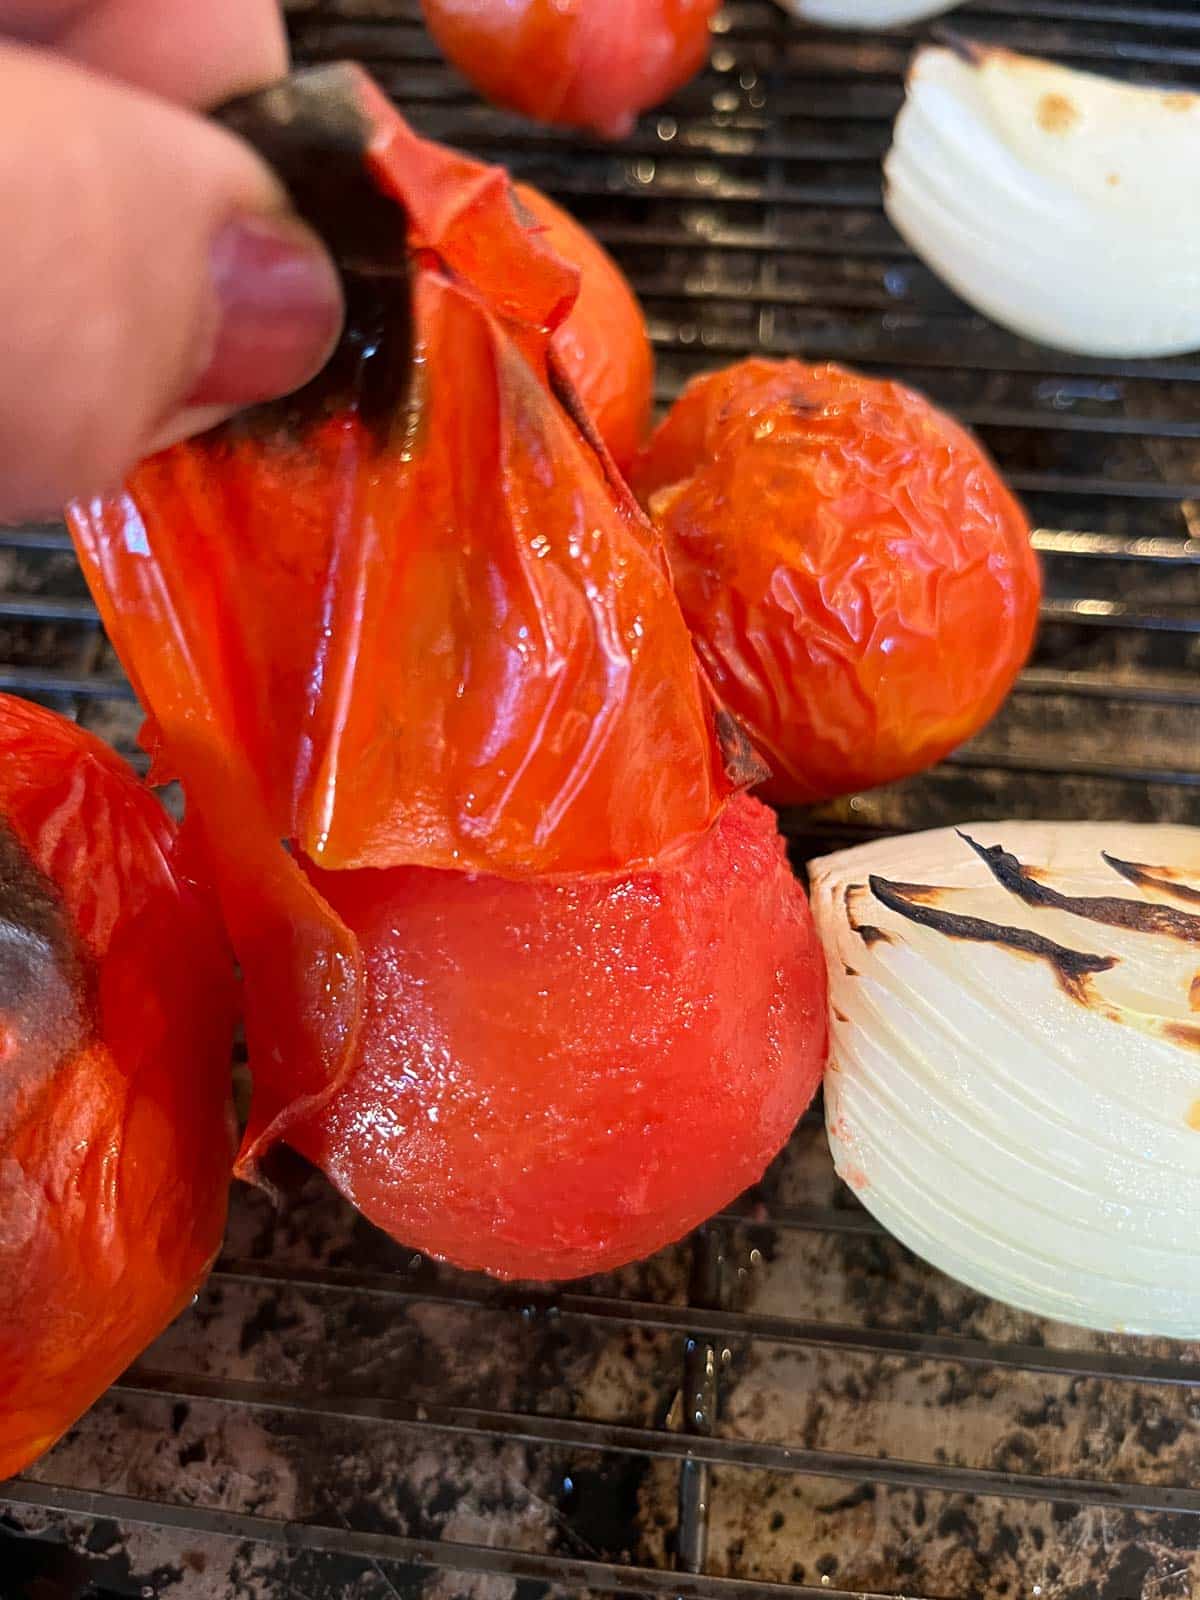 removing peels from tomatoes